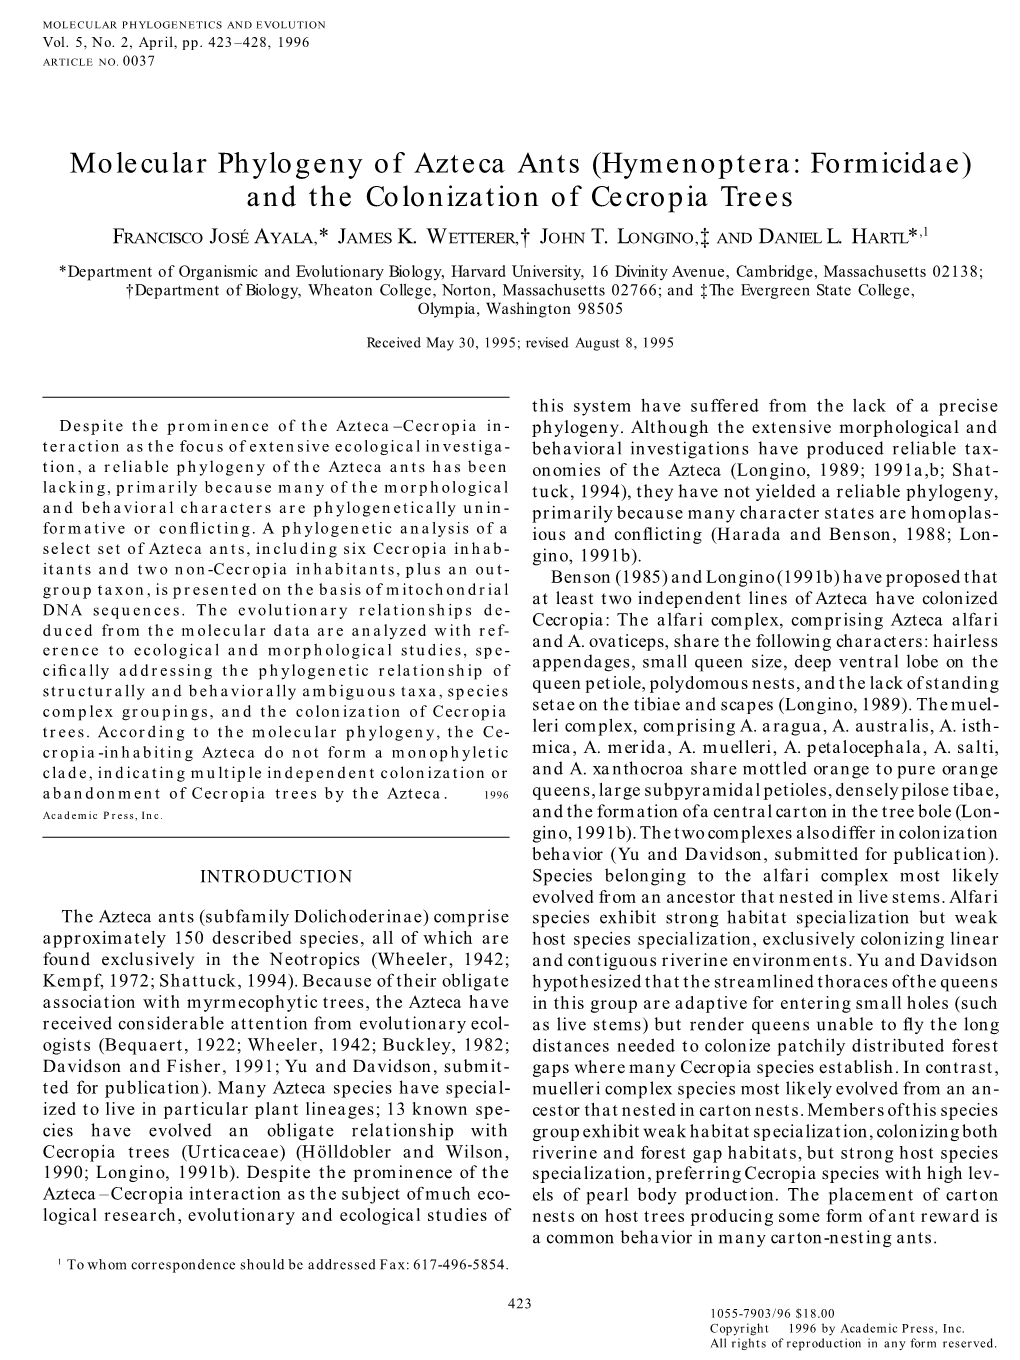 Molecular Phylogeny of Azteca Ants (Hymenoptera: Formicidae) and the Colonization of Cecropia Trees